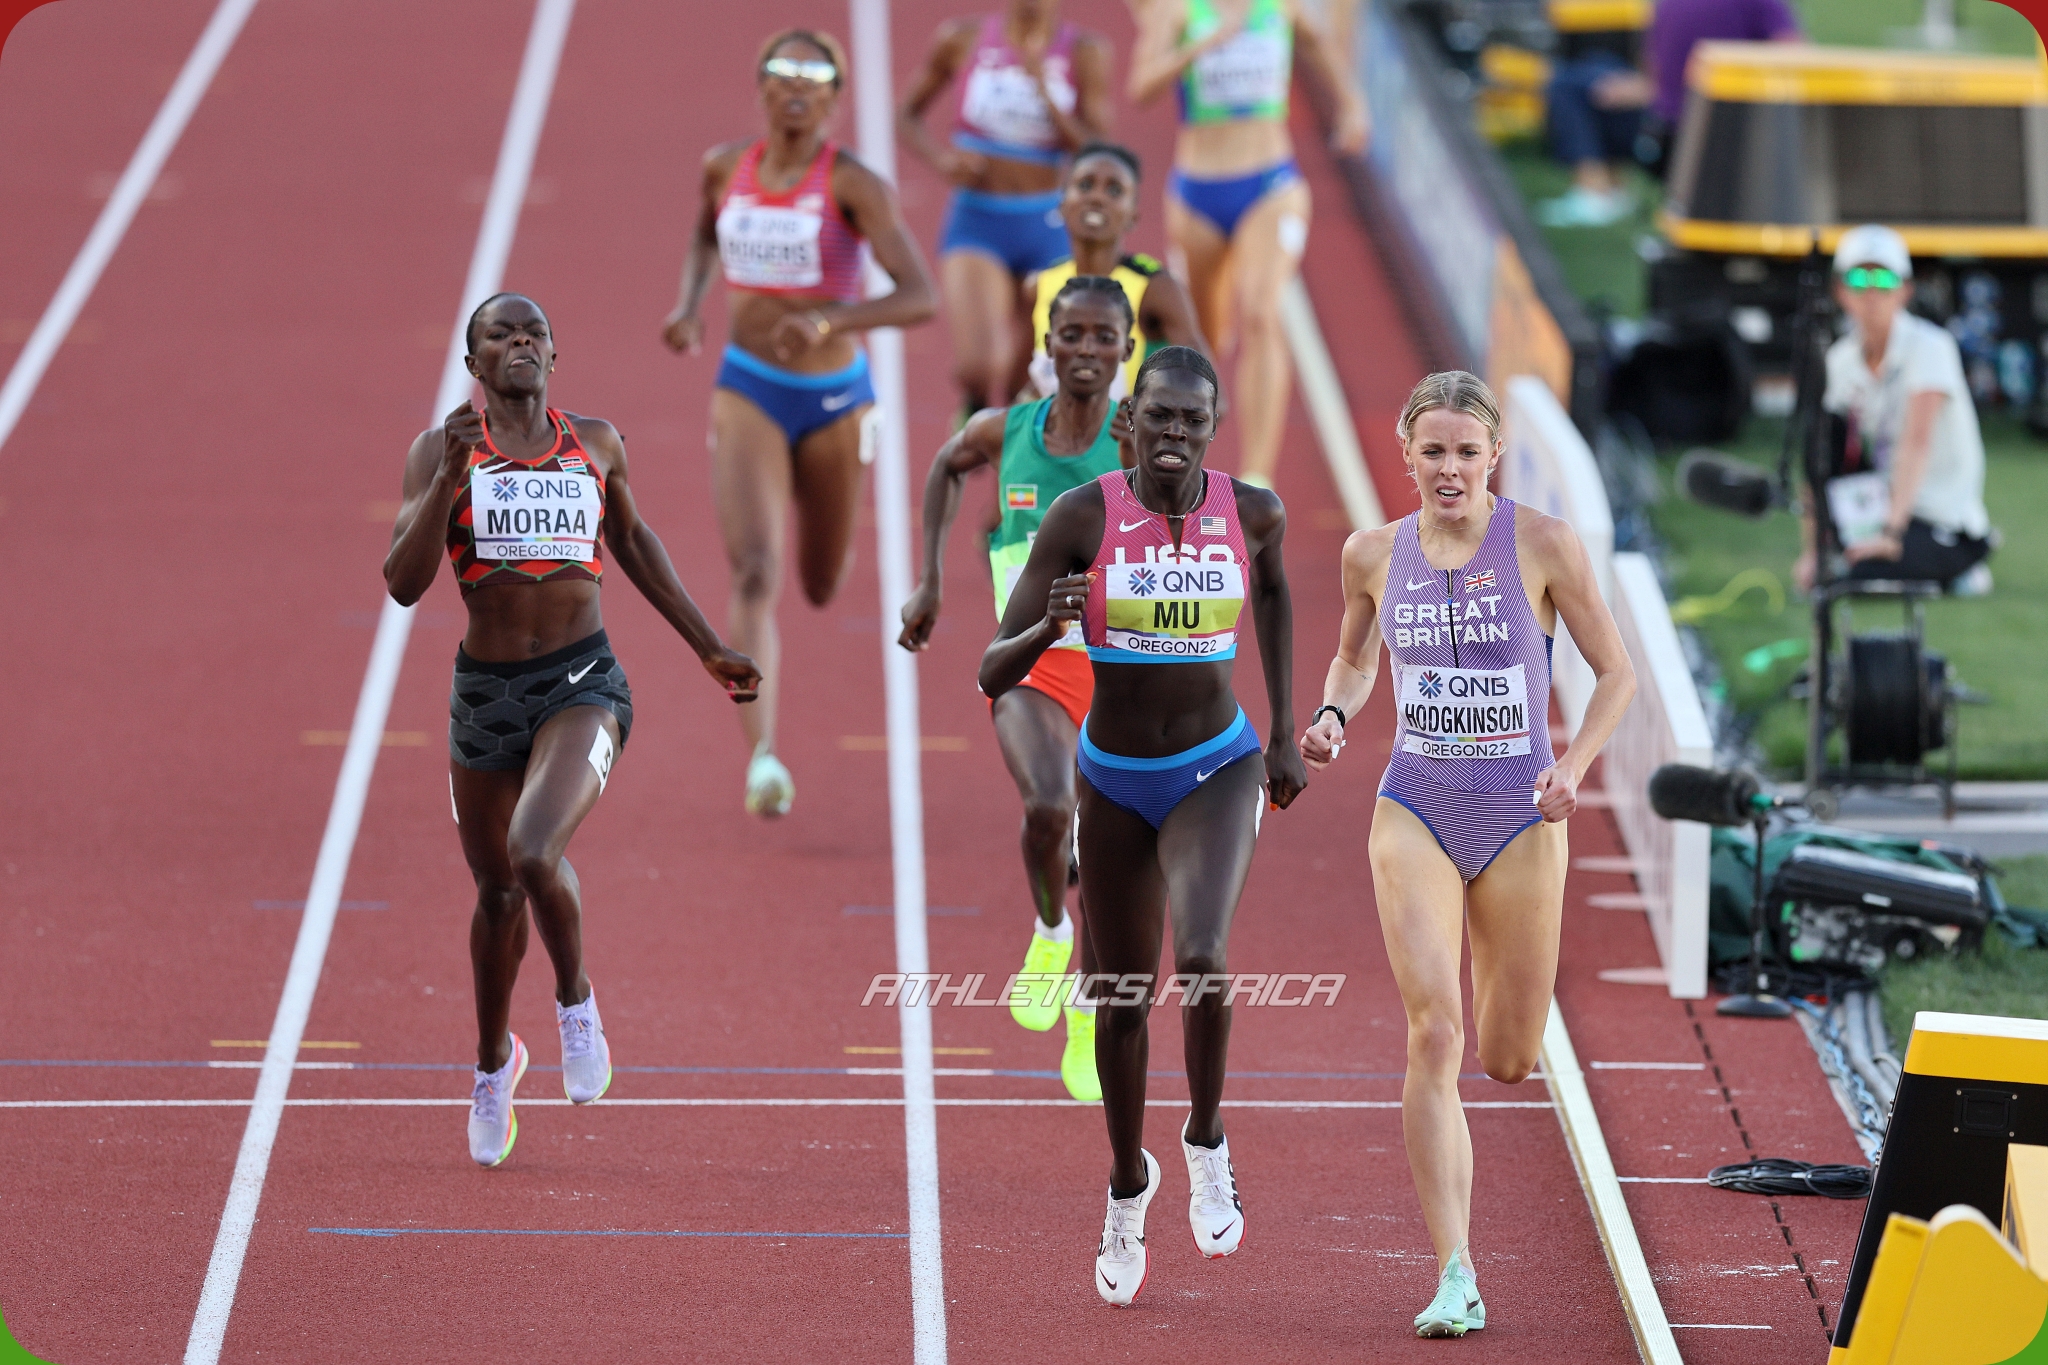 Mary Moraa of Team Kenya, Athing Mu of Team United States and Keely Hodgkinson of Team Great Britain compete in the Women's 800m Final on day ten of the World Athletics Championships Oregon22 at Hayward Field on July 24, 2022 in Eugene, Oregon. (Photo by Andy Lyons/Getty Images for World Athletics)